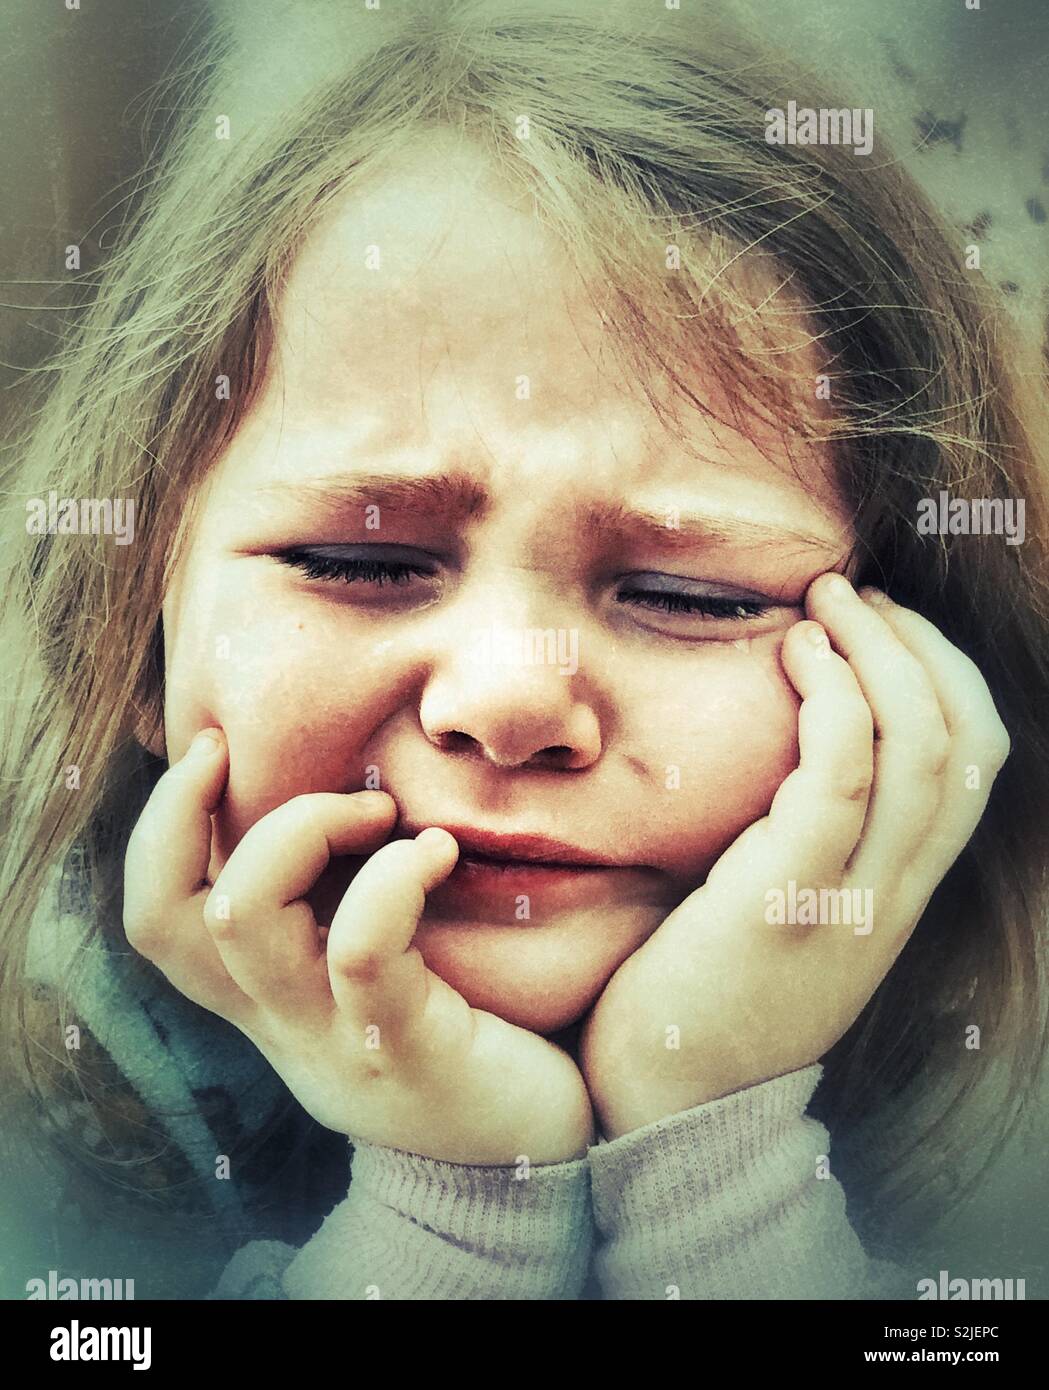 Sad crying girl with hands on face Stock Photo - Alamy